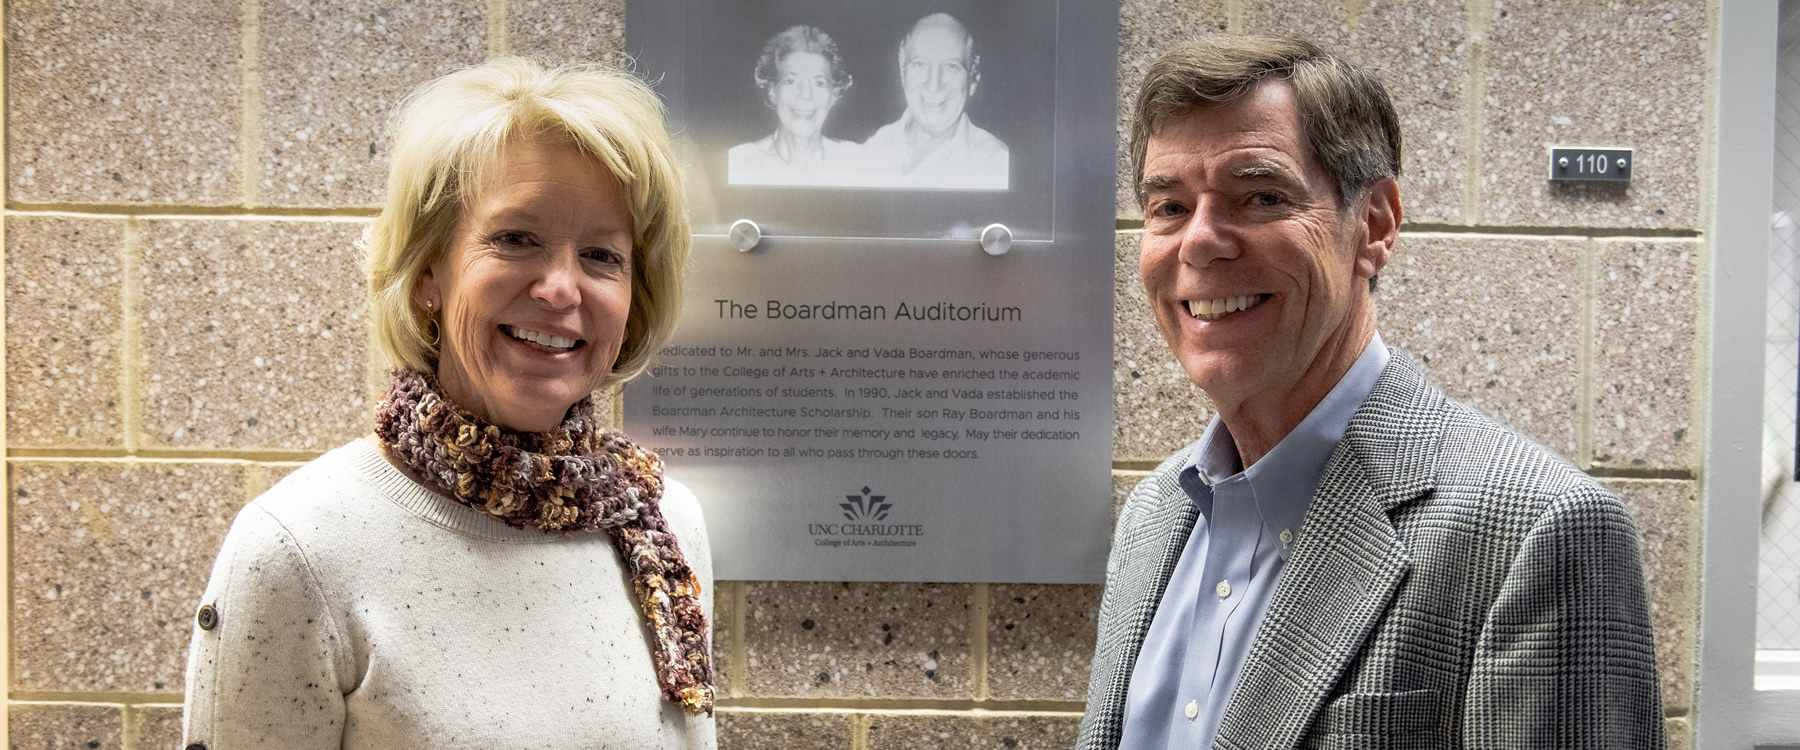 The School of Architecture (SoA) recently renamed the newly renovated Storrs Lecture Hall, the Jack and Vada Boardman Auditorium, in recognition of the Boardman family’s generous funding of student scholarships.